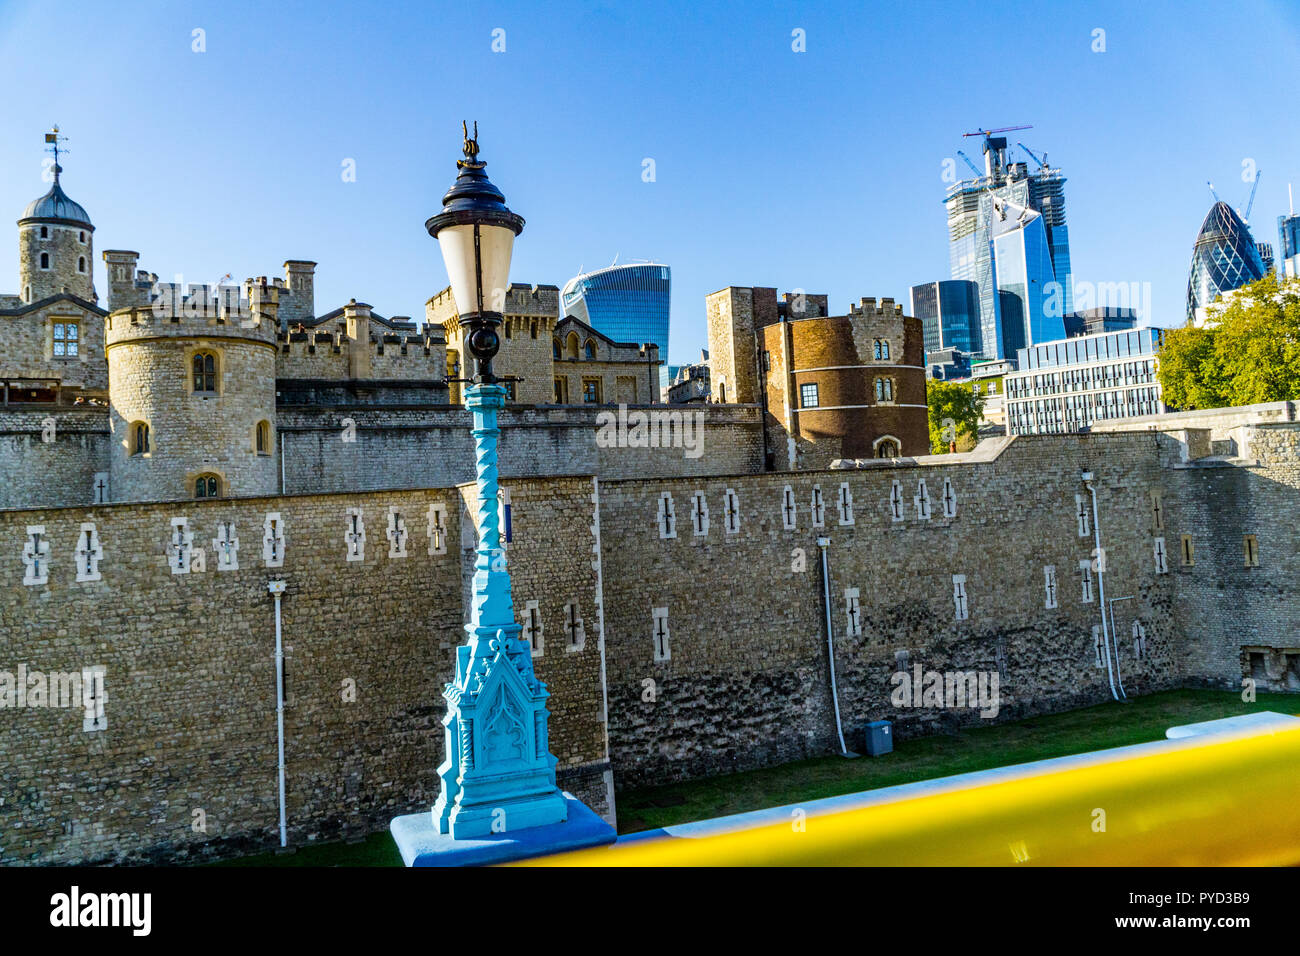 The Tower of Londin in London England Stock Photo